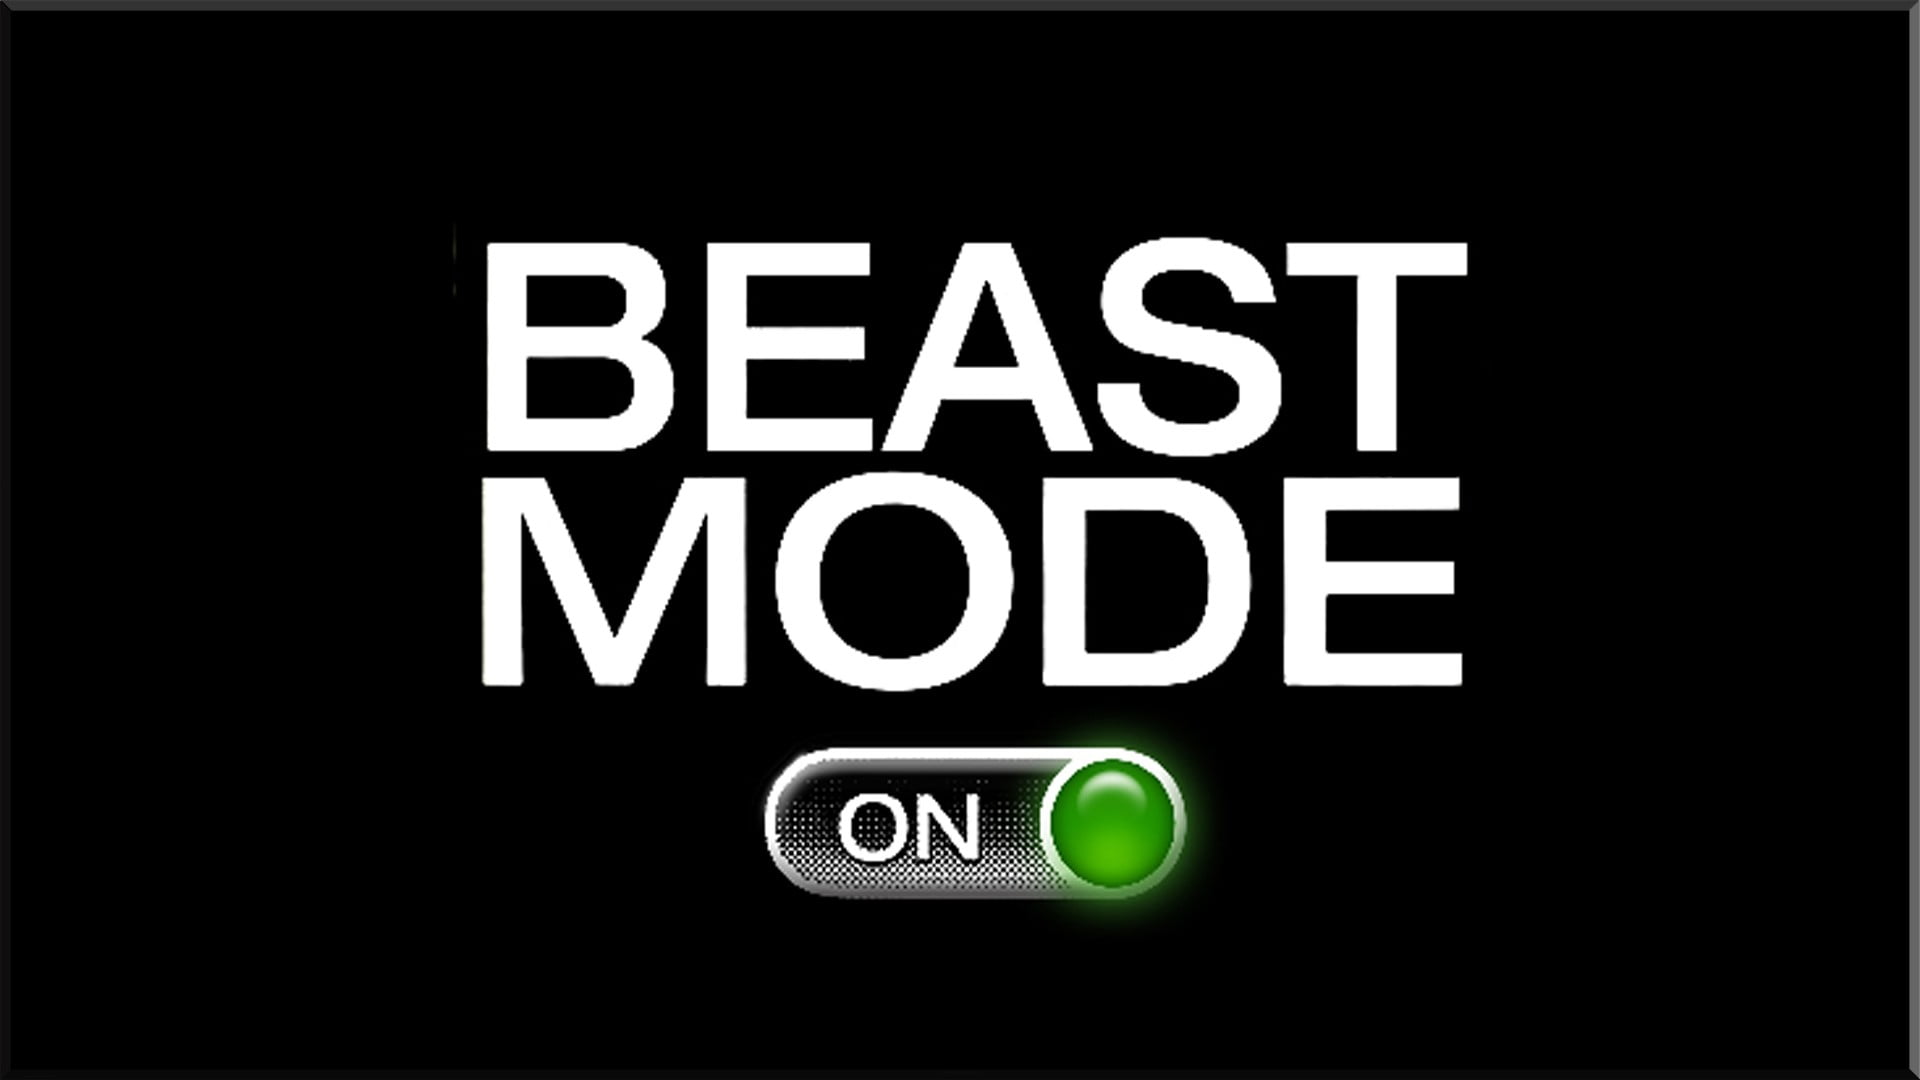 beast mode on text overlay with black background, simple background